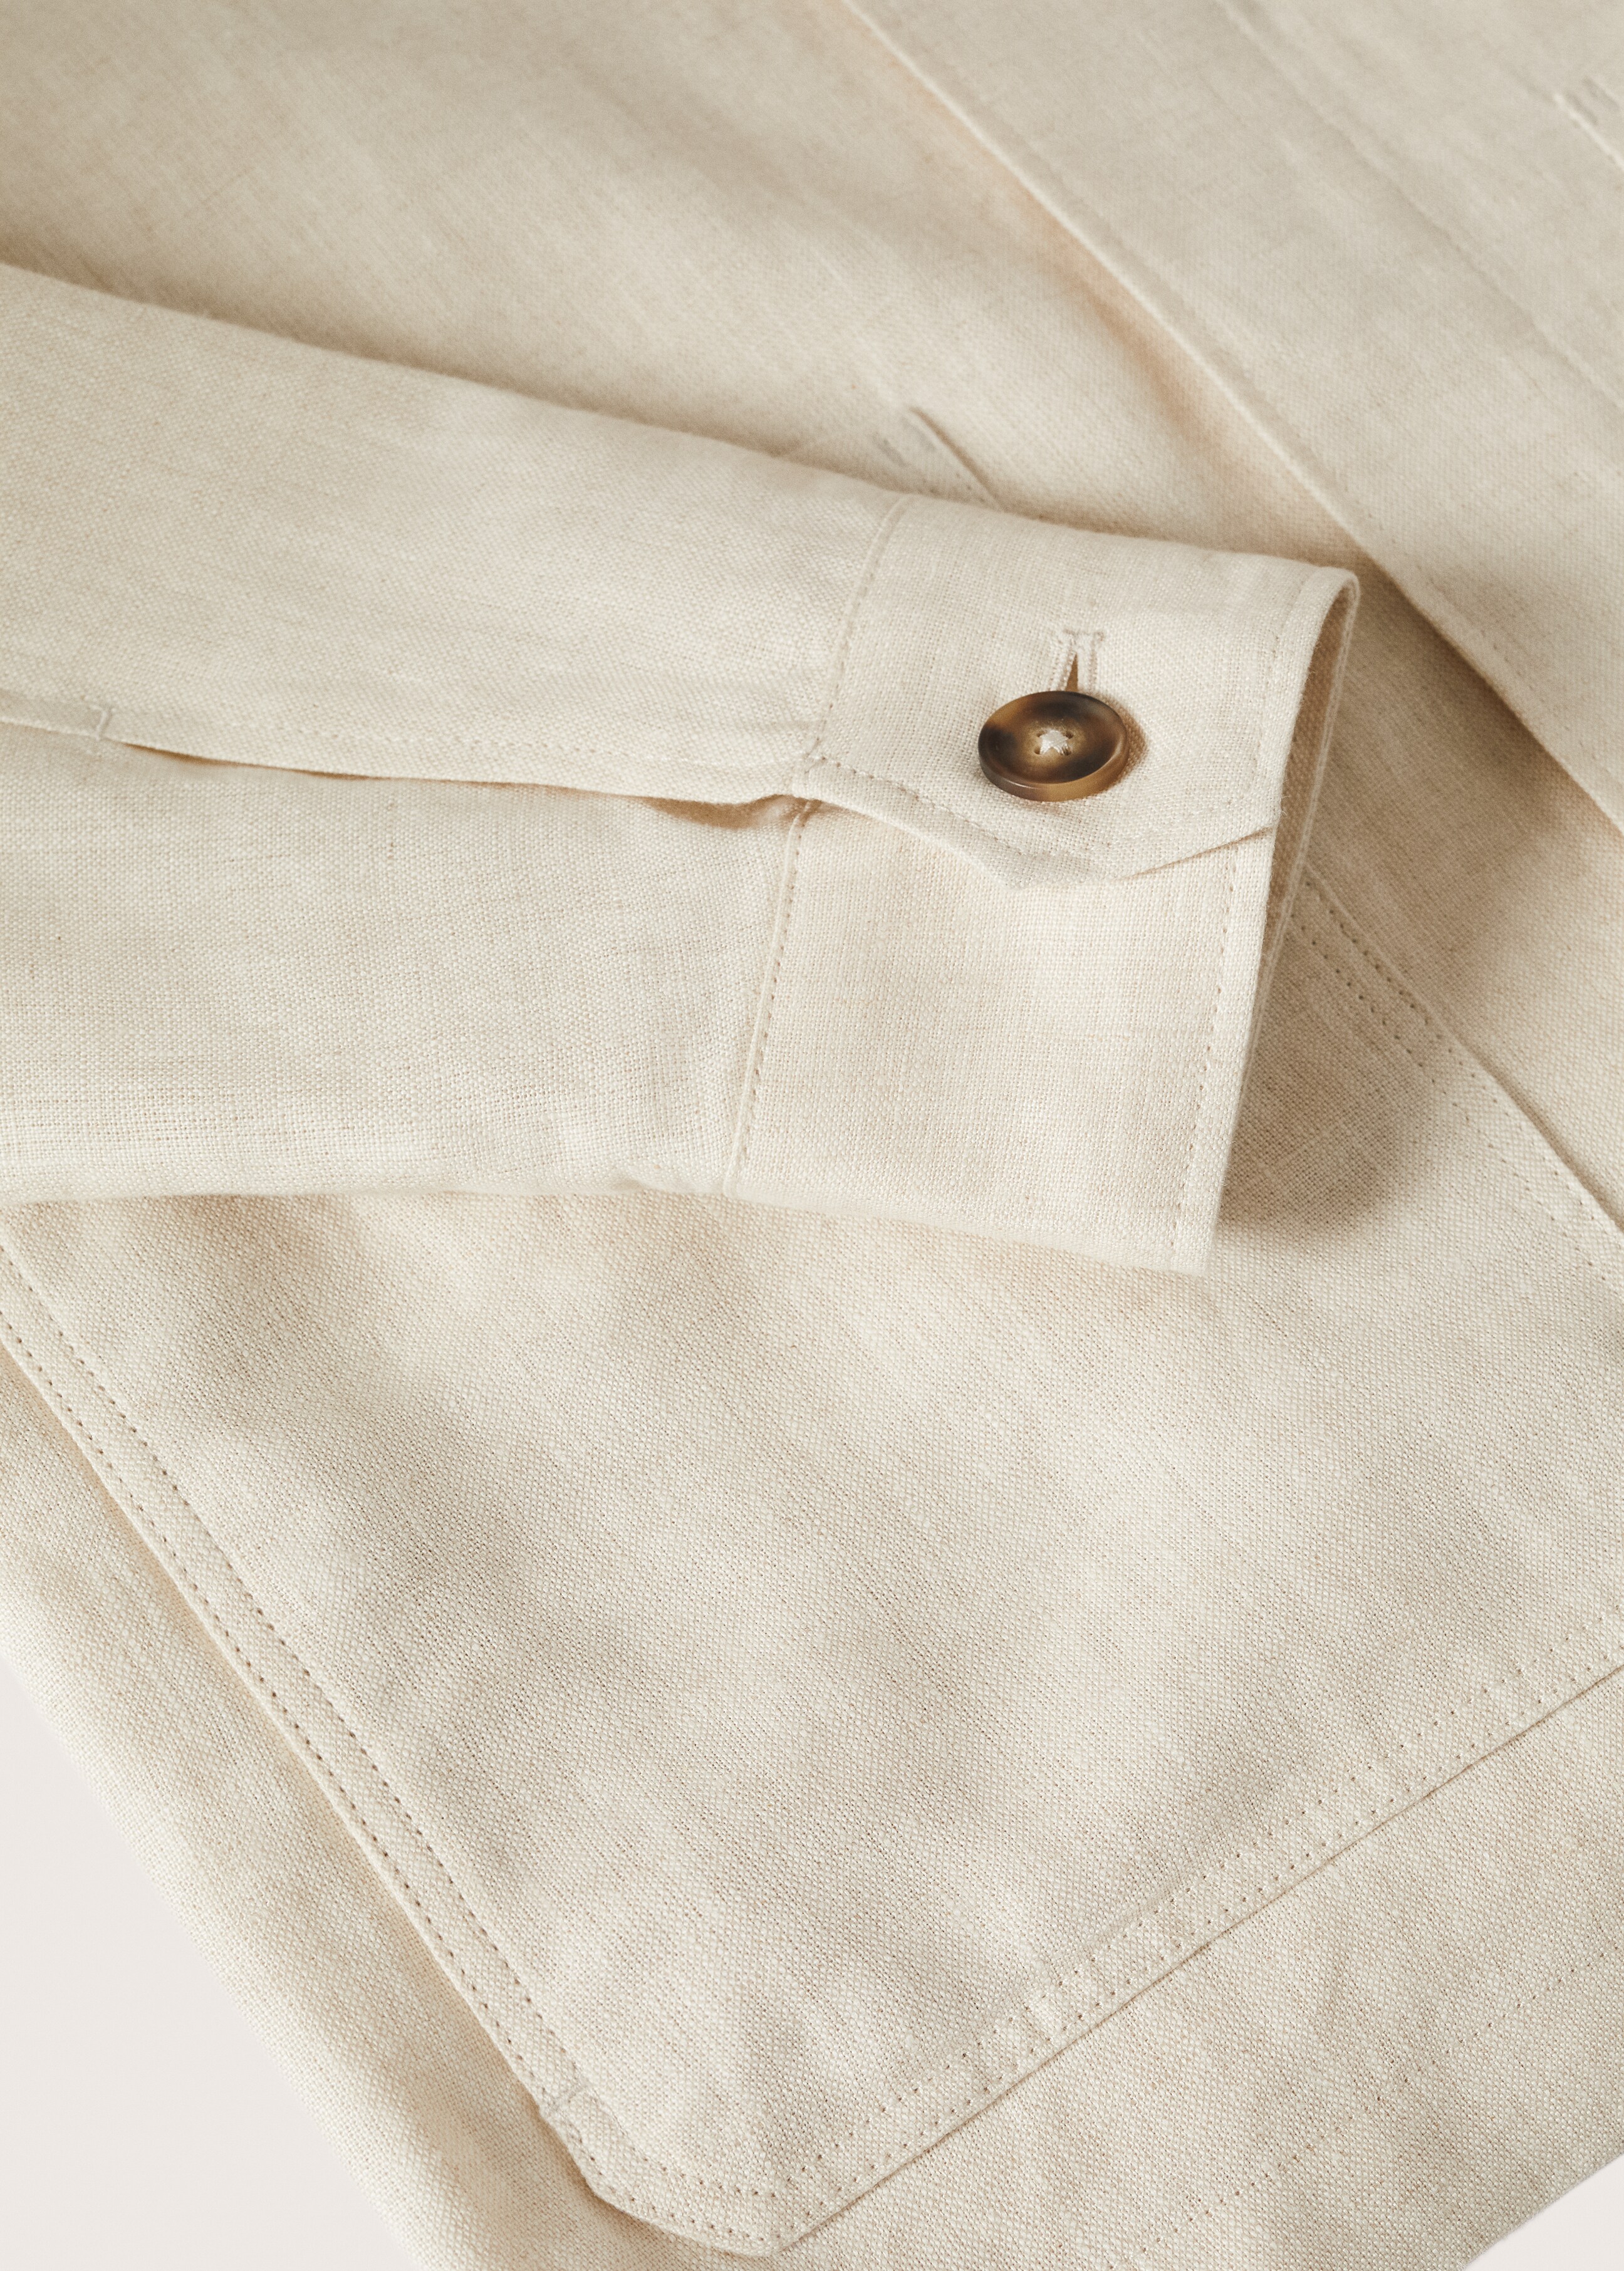 Linen worker jacket - Details of the article 8